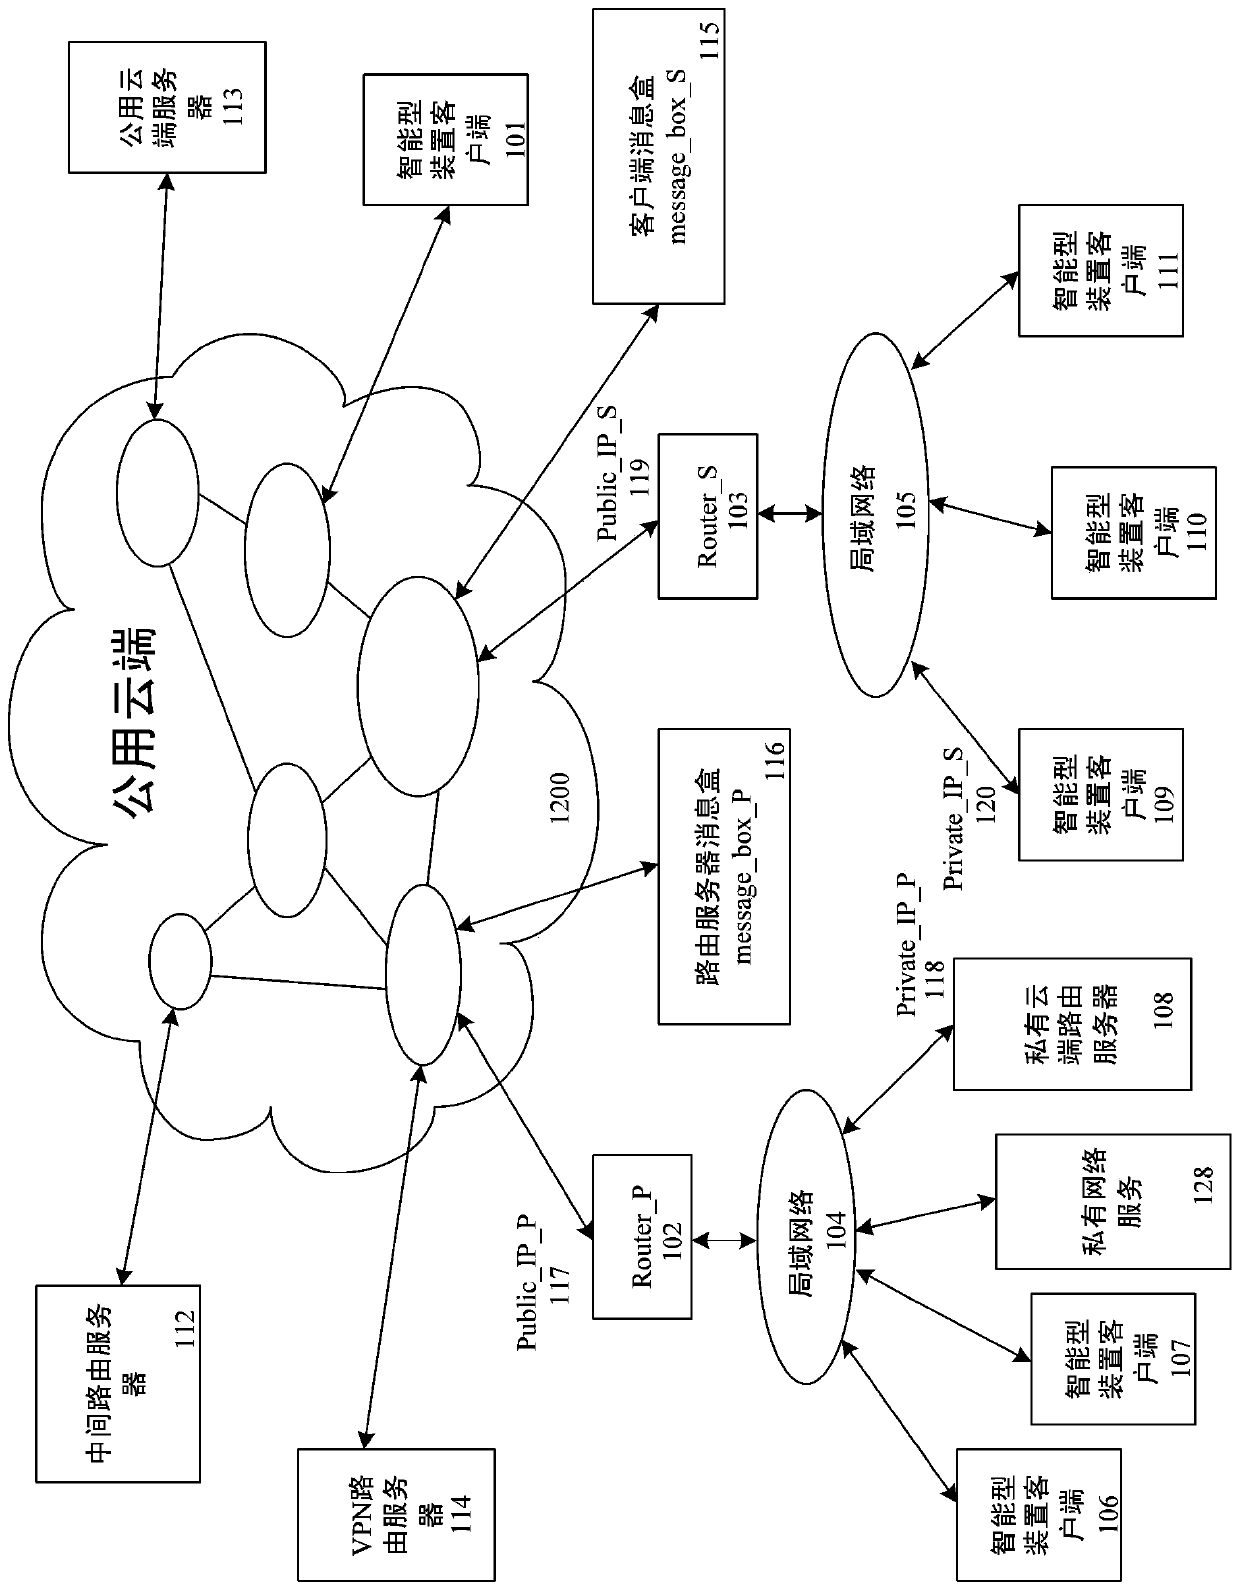 Method for Utilizing Private Routing Server, Public Network and Intelligent Device Client